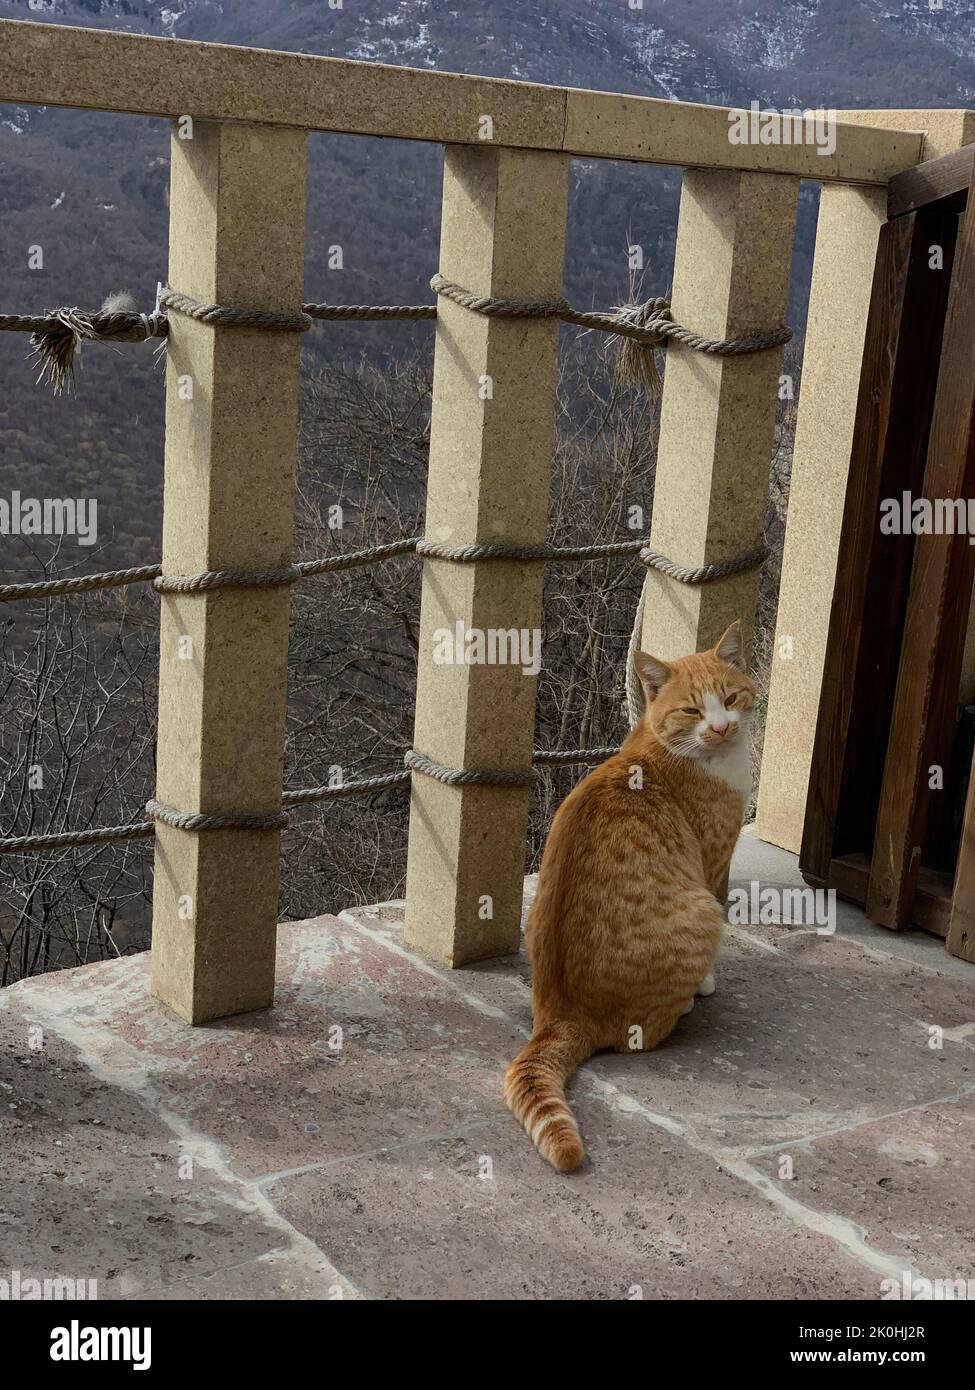 A vertical shot of an orange cat sitting on a house porch Stock Photo